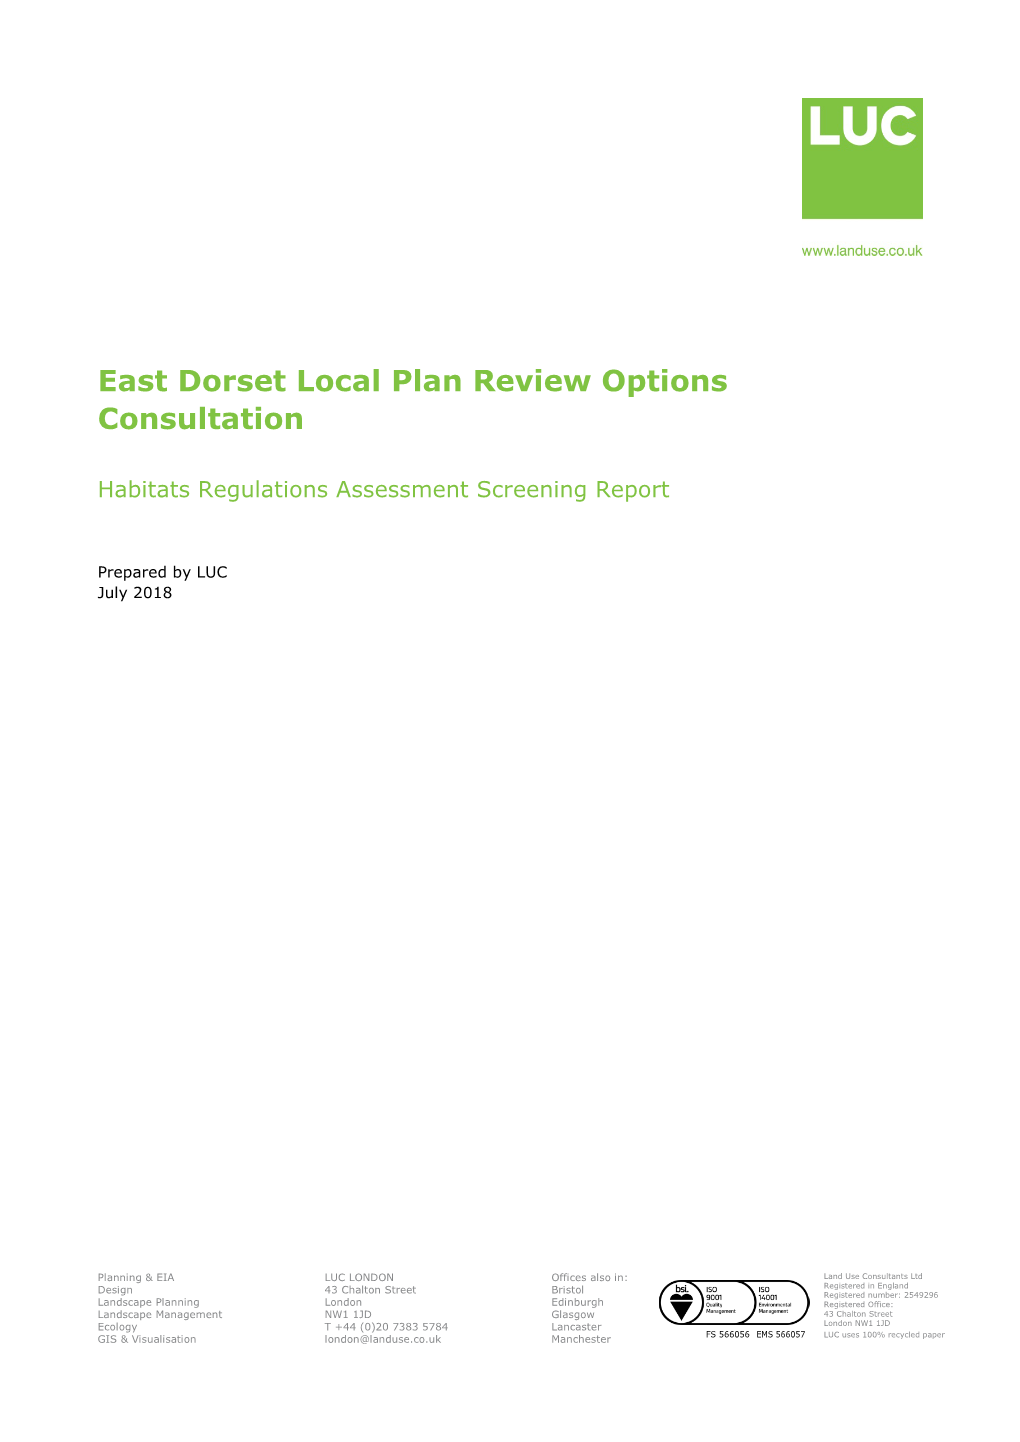 East Dorset Local Plan Review Options Consultation